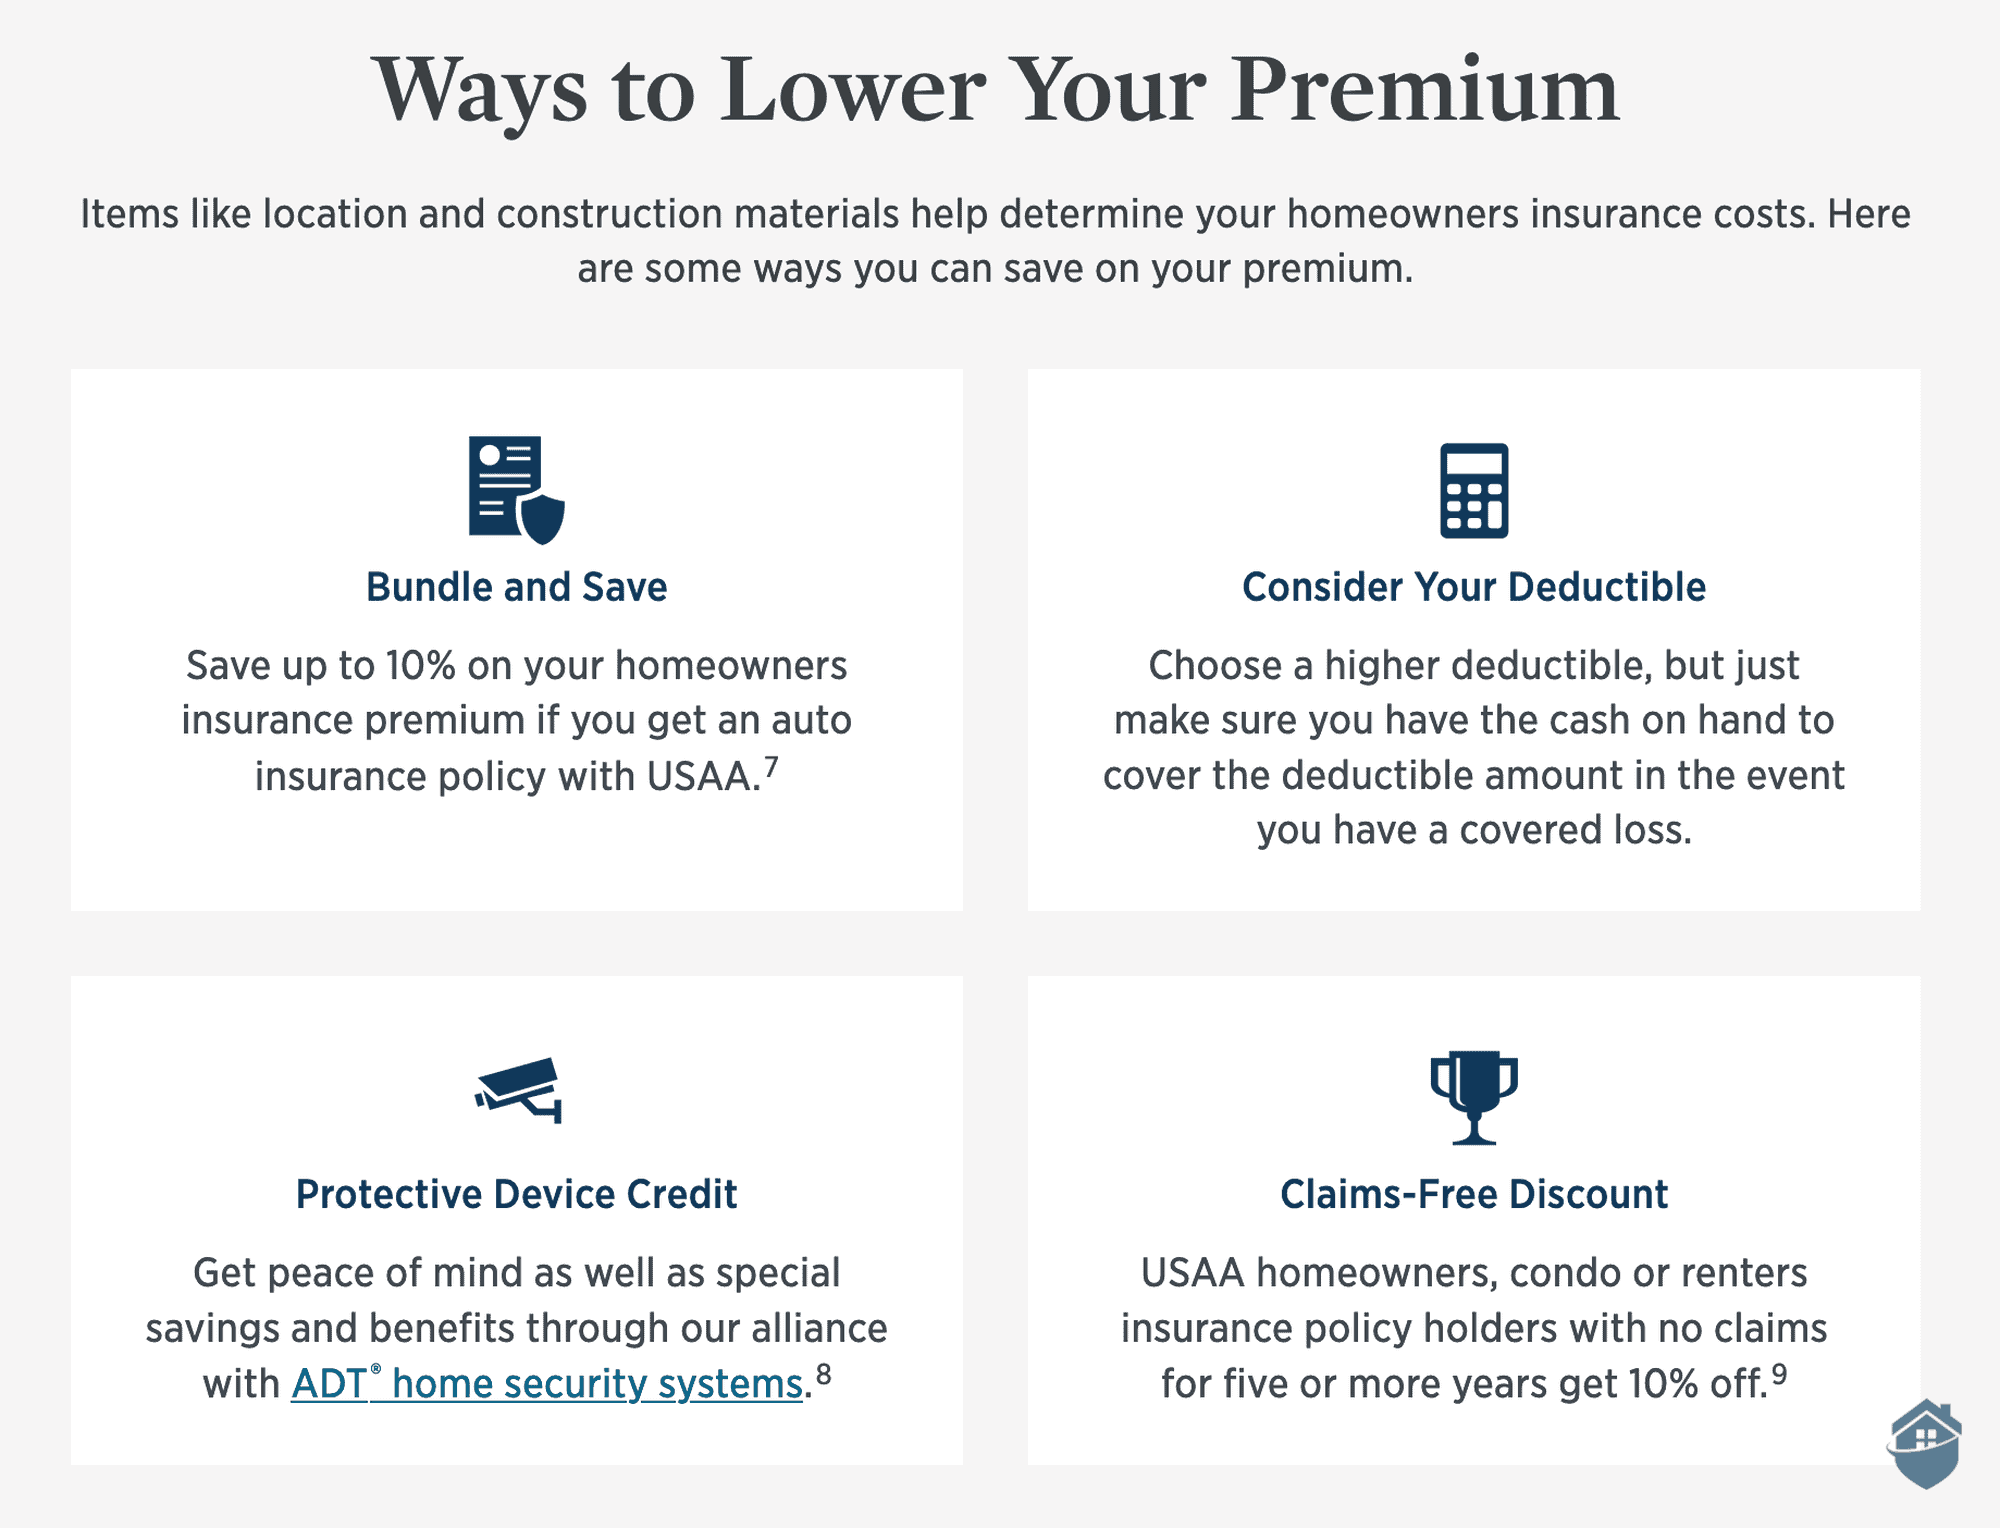 There are a few ways to save with USAA